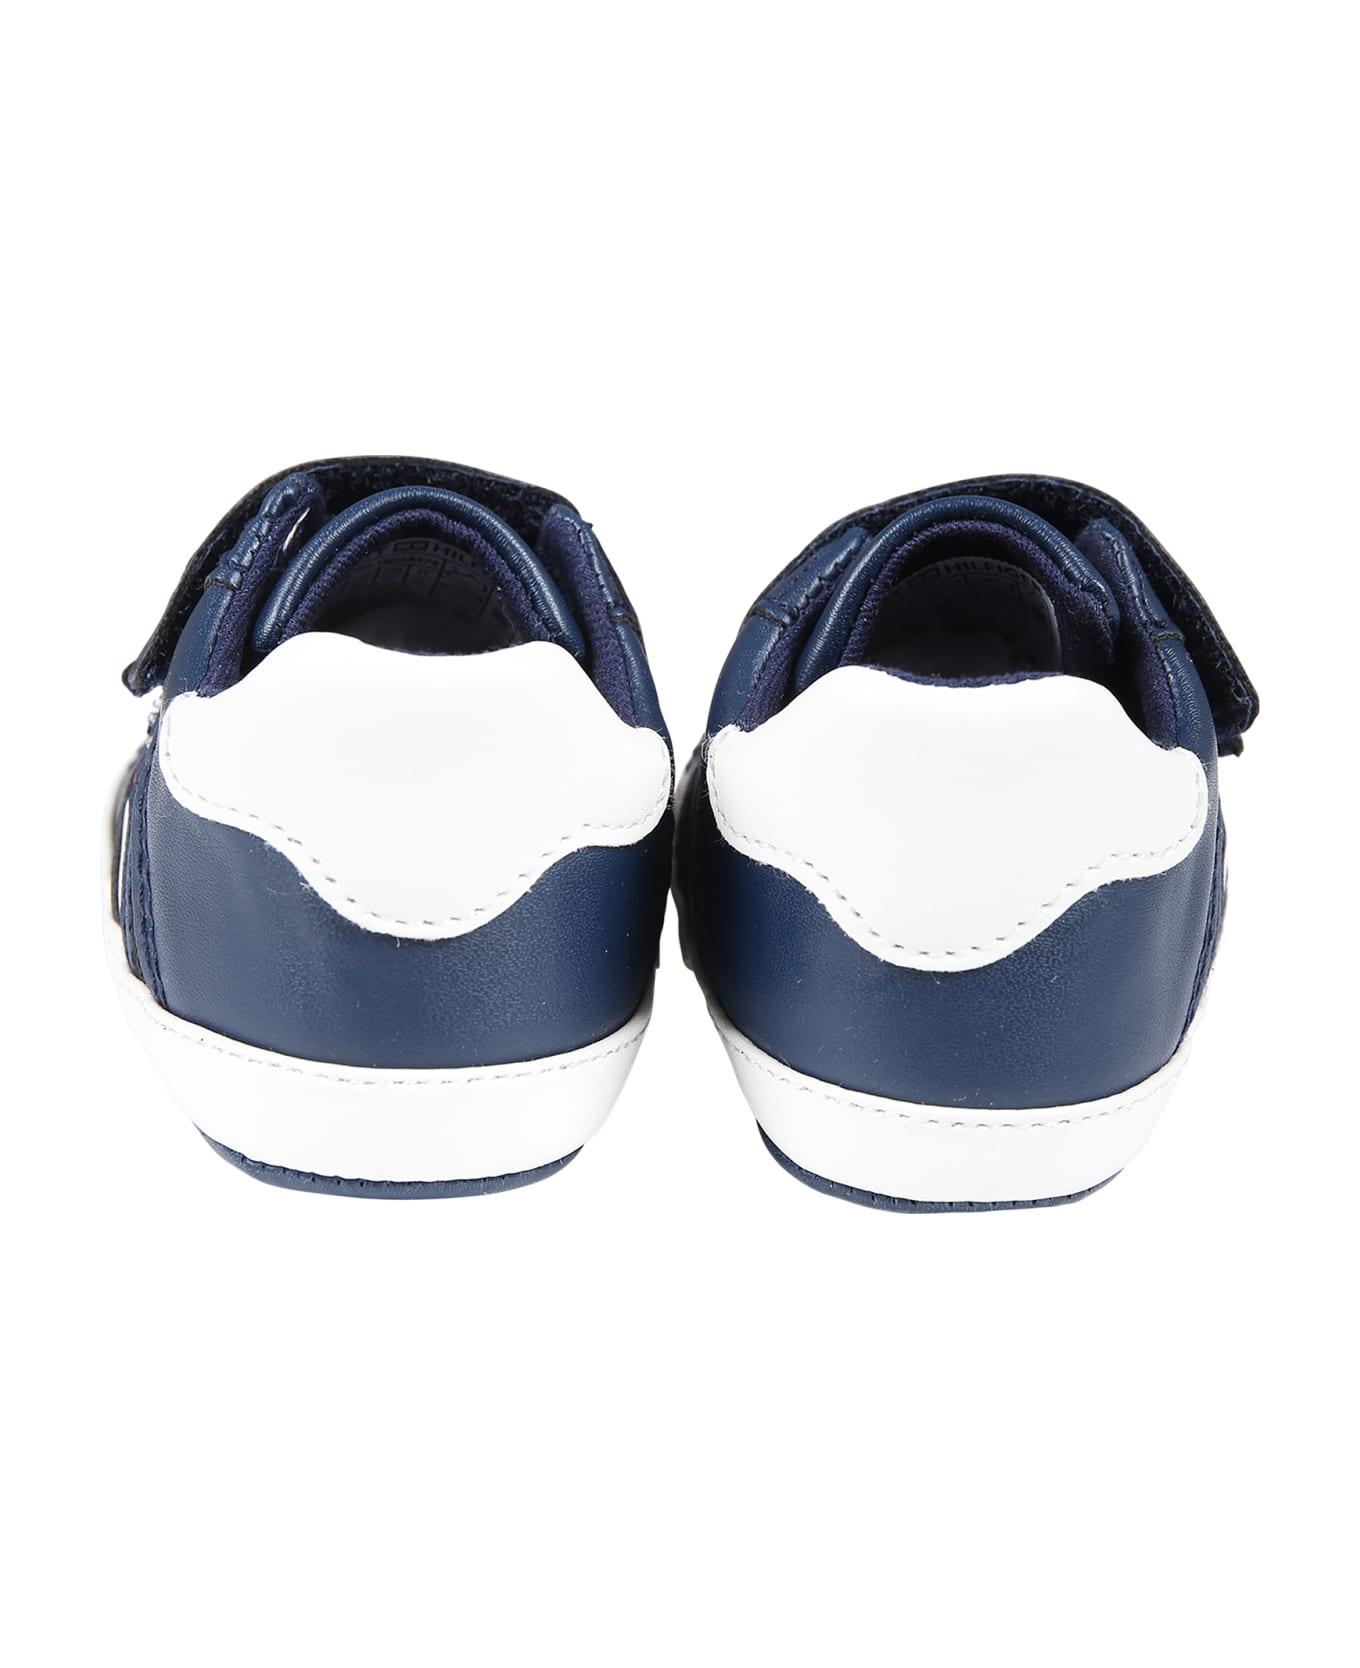 Tommy Hilfiger Blue Sneakers For Baby Boy With Logo - Blue